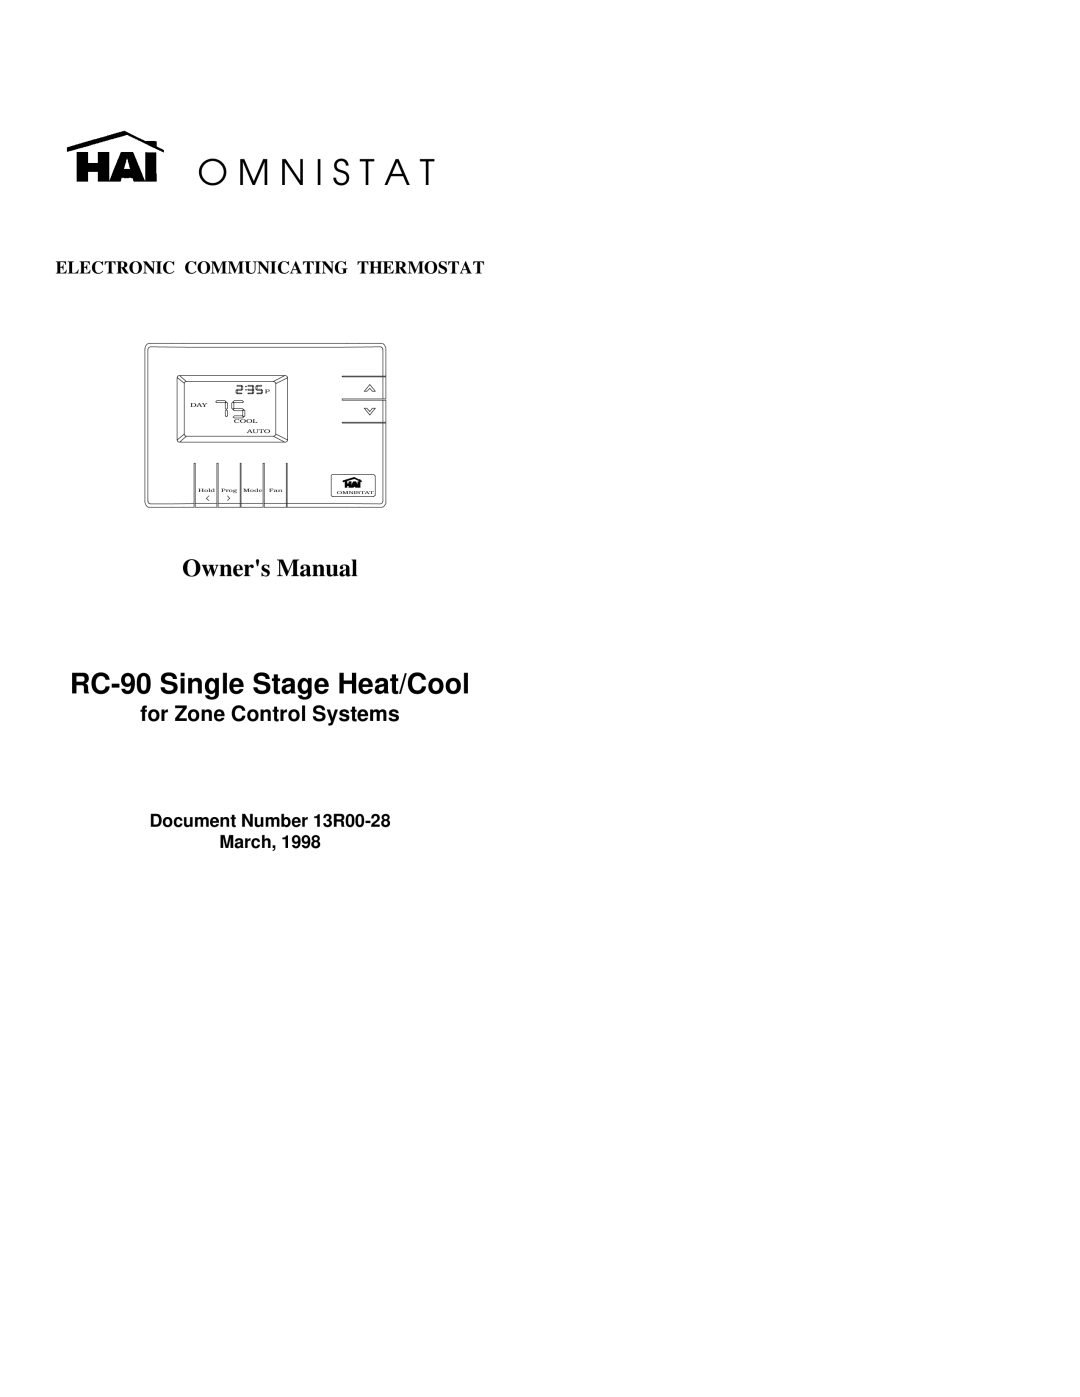 Home Automation owner manual O M N I S T A T, RC-90Single Stage Heat/Cool, for Zone Control Systems, Day Cool Auto 